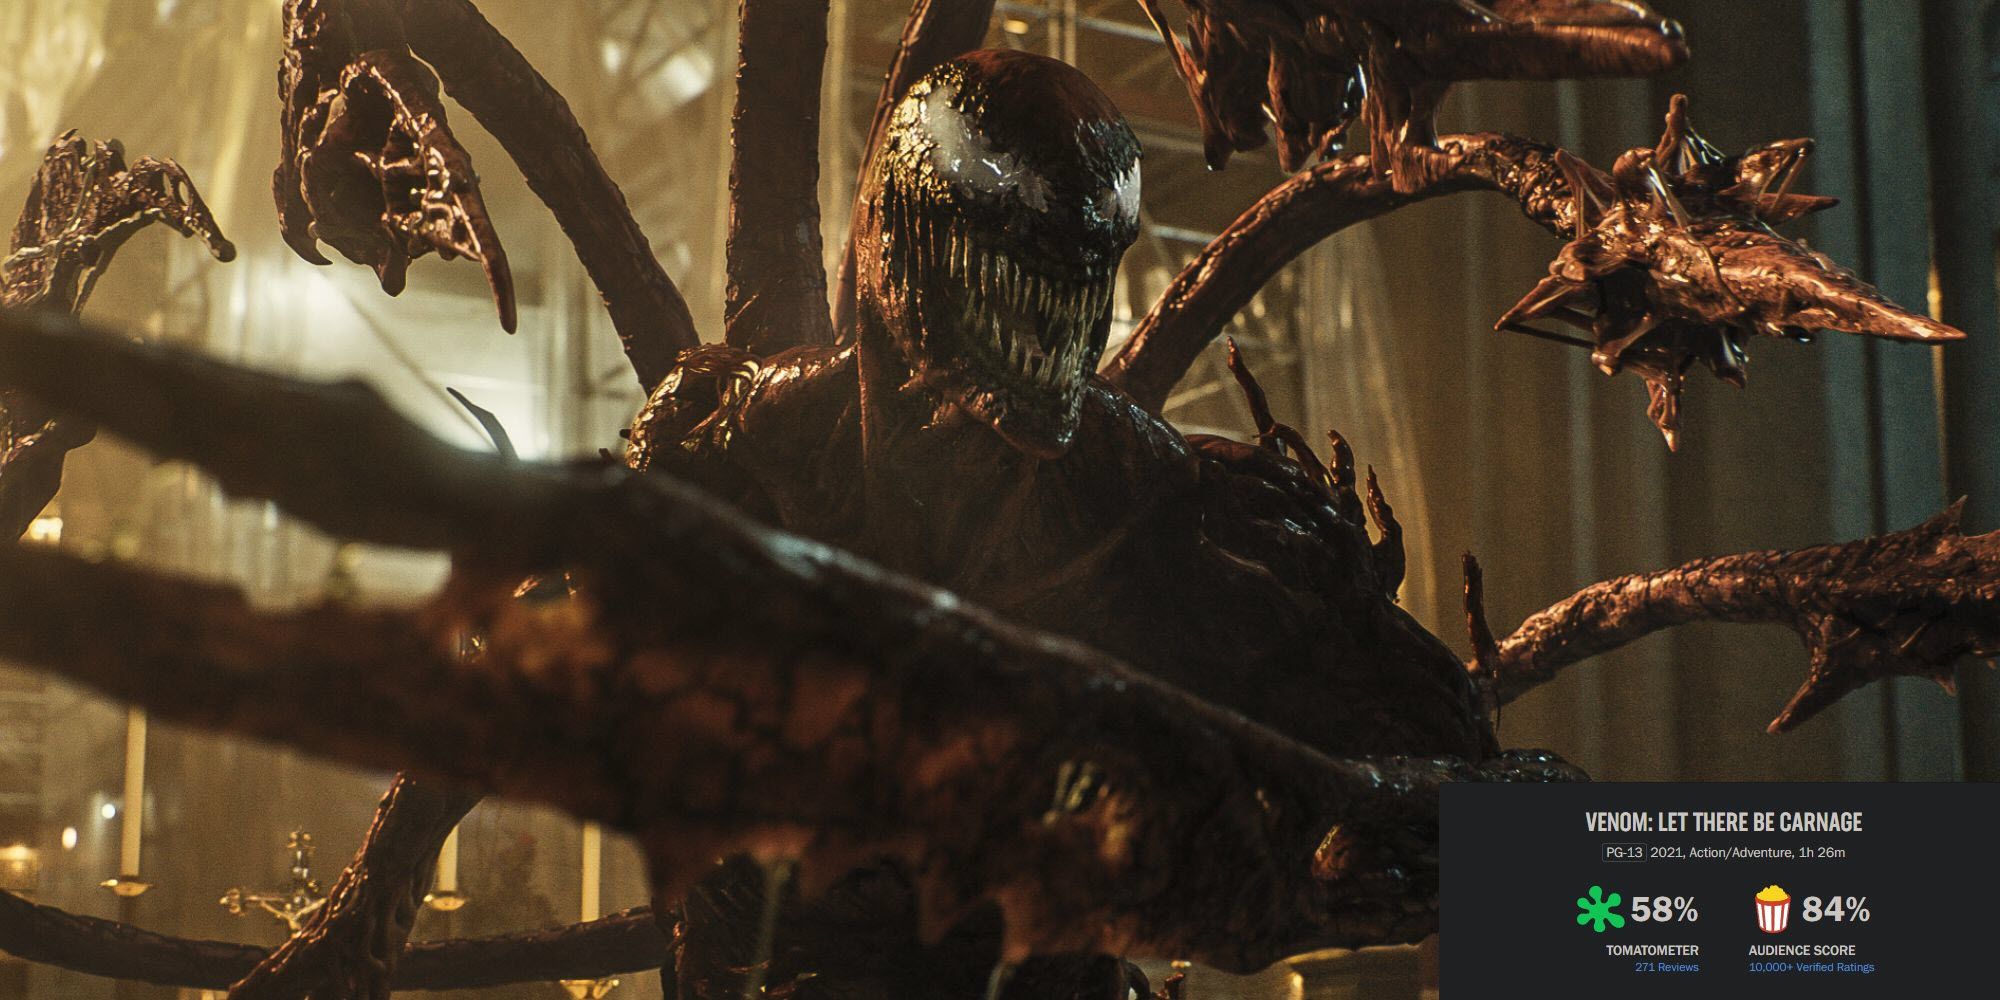 image from the 2021 film Venom Let There Be Carnage featuring the symbiote Carnage smiling menacingly with tendrils on his back